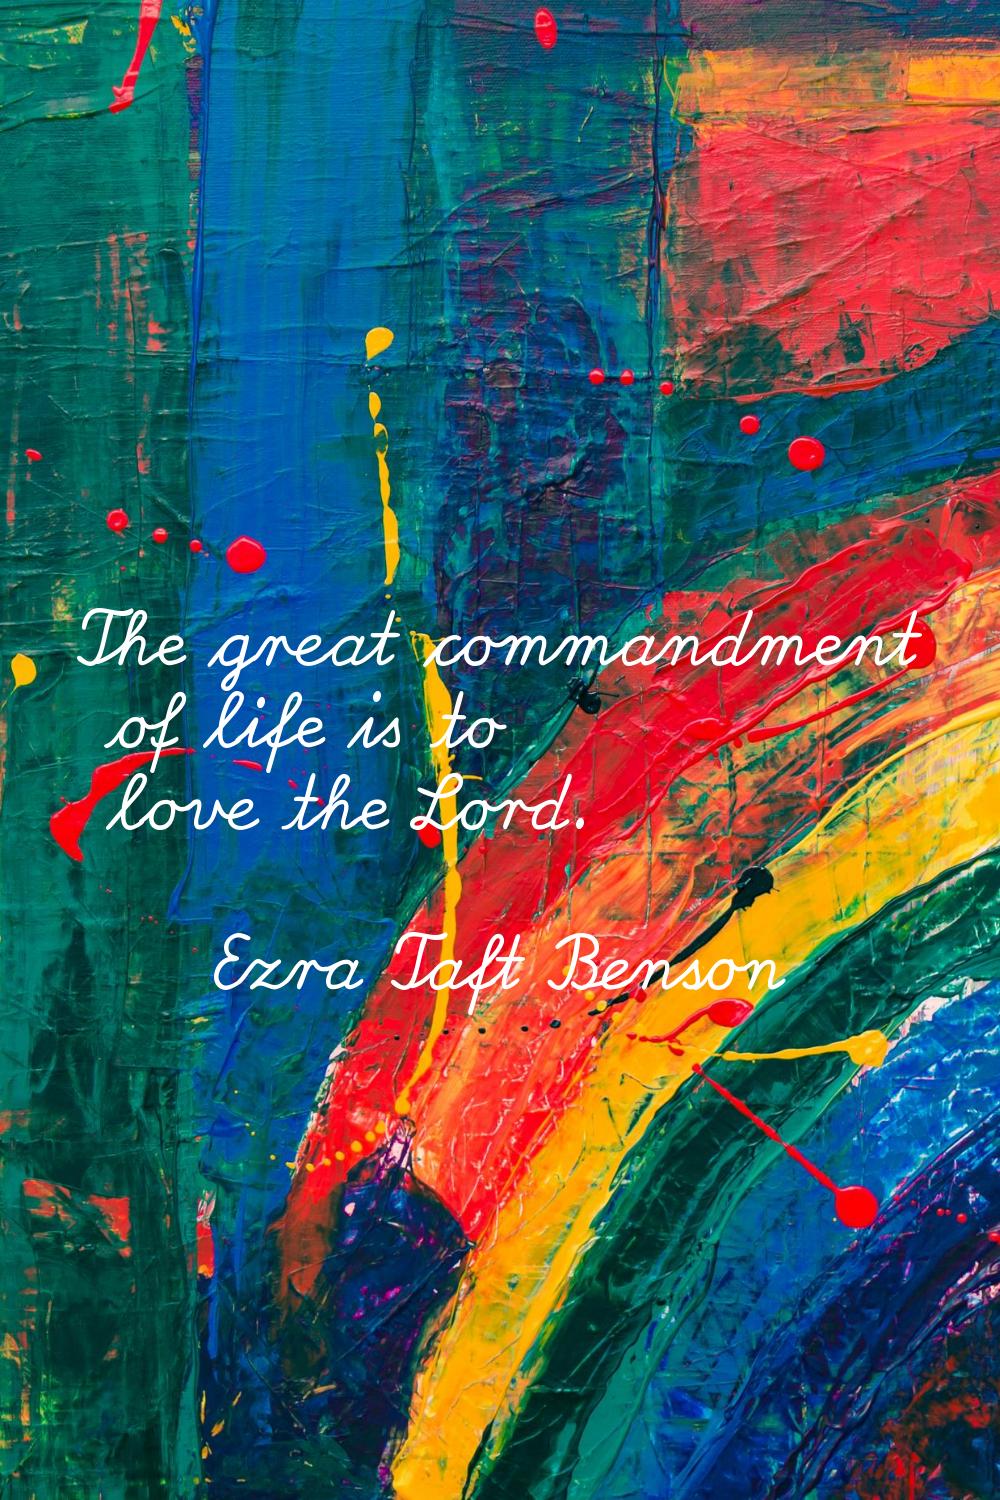 The great commandment of life is to love the Lord.